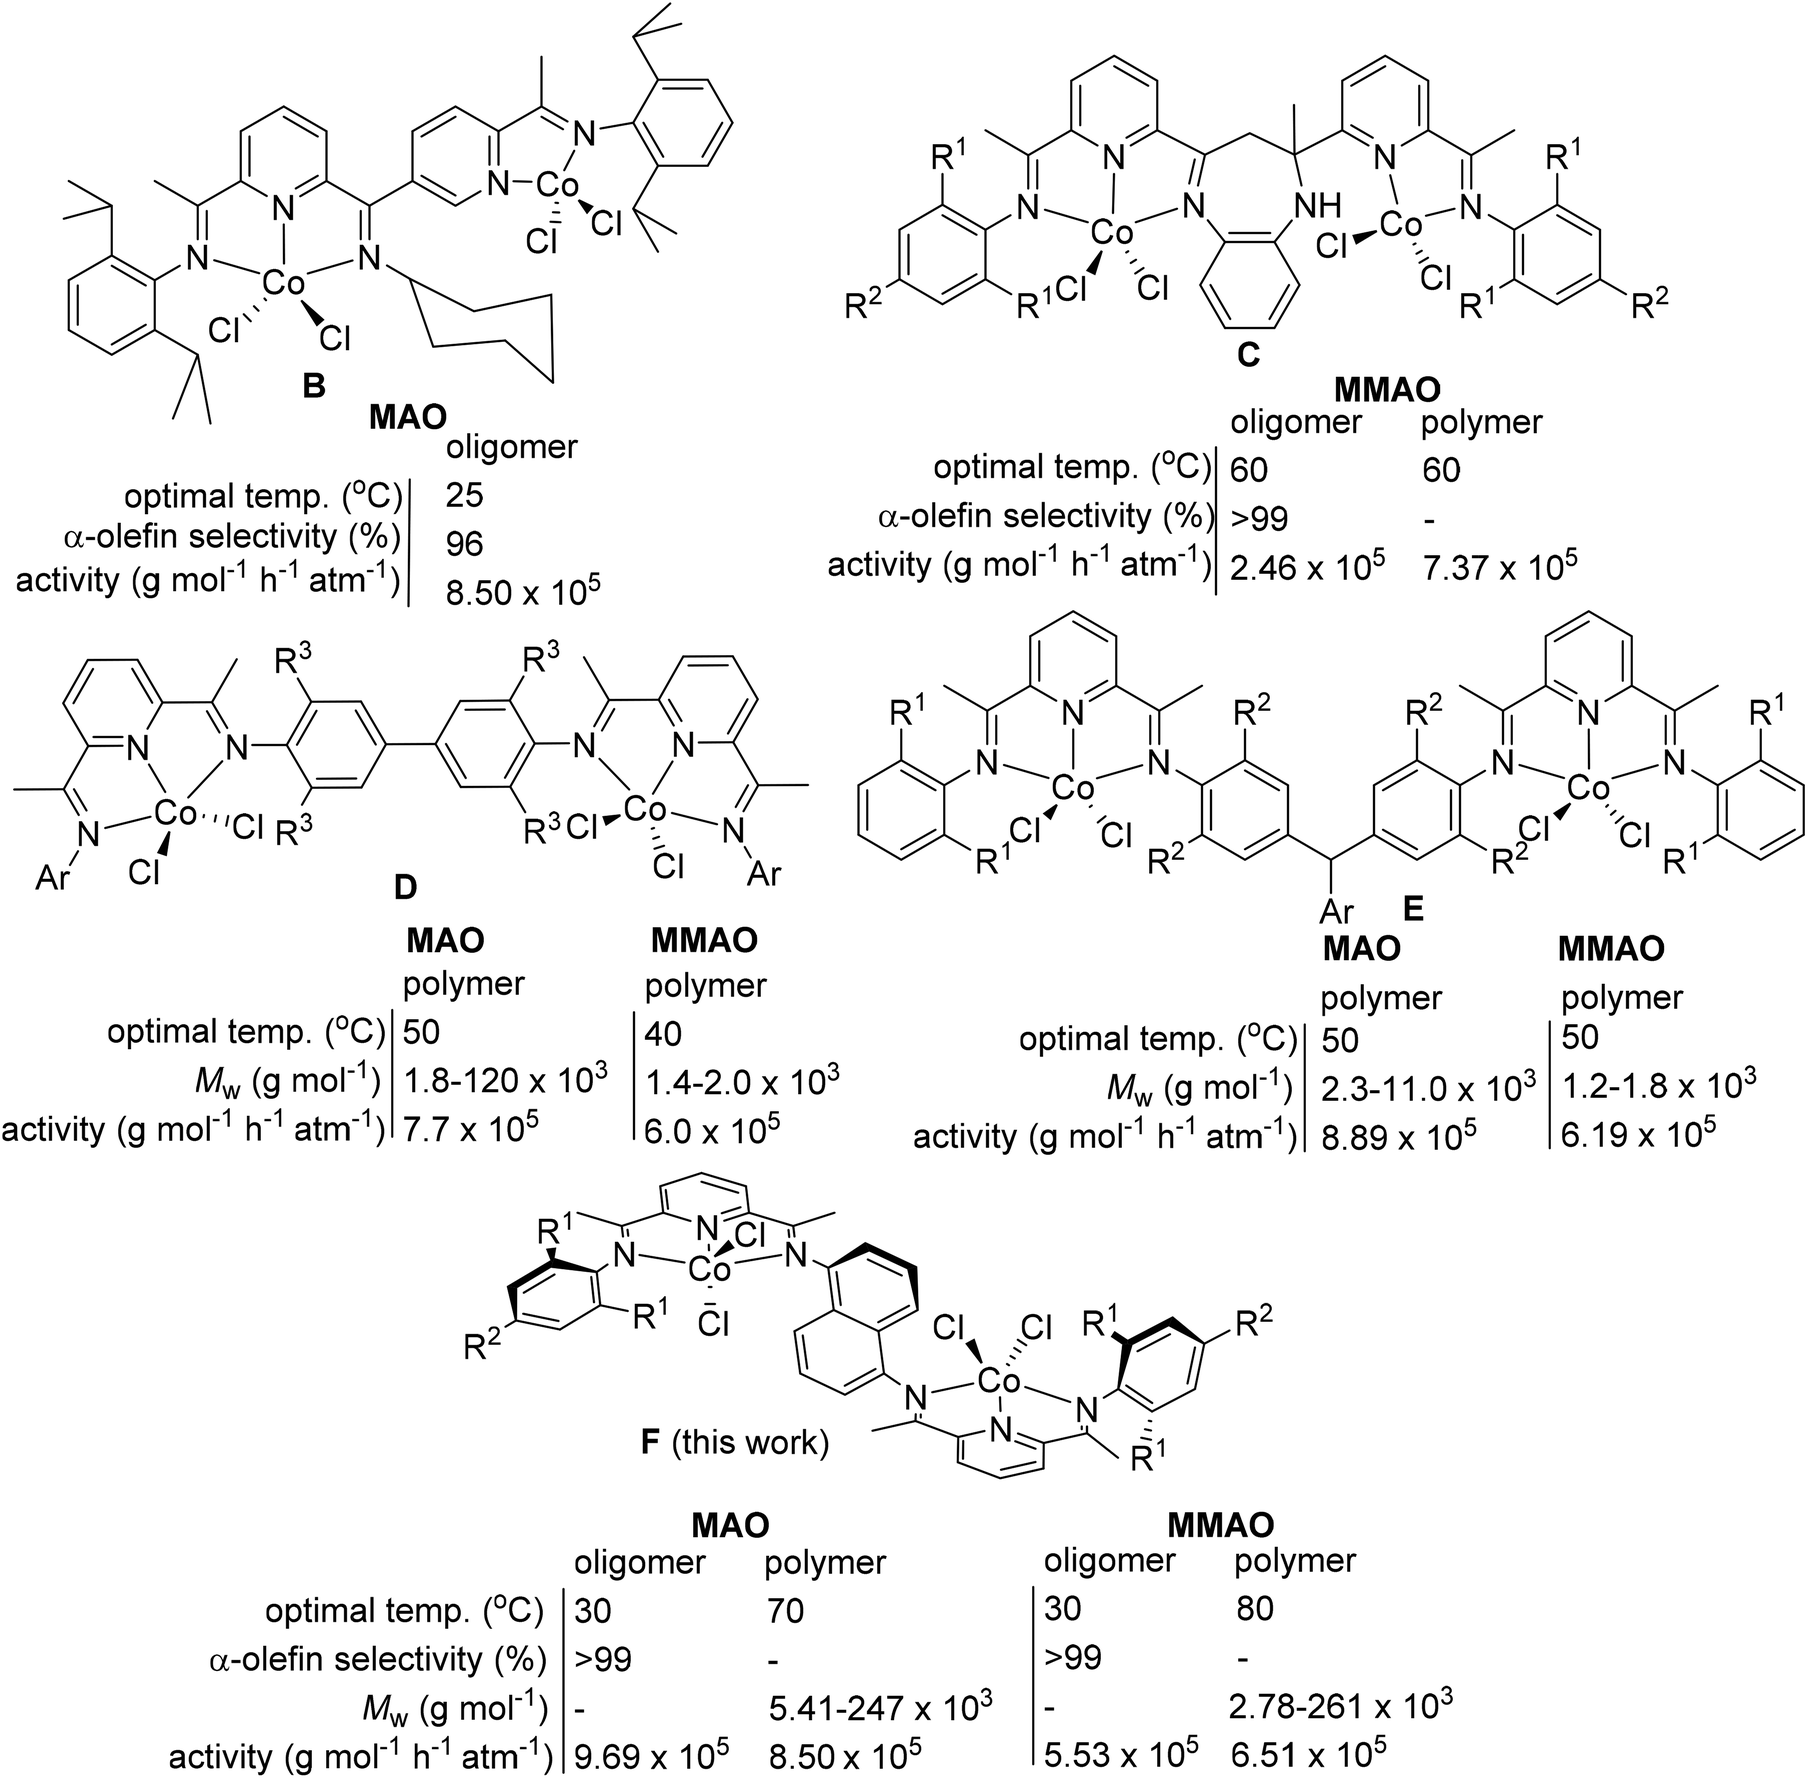 1 5 Naphthyl Linked Bis Imino Pyridines As Binucleating Scaffolds For Dicobalt Ethylene Oligo Polymerization Catalysts Exploring Temperature And Steric Effects Dalton Transactions Rsc Publishing